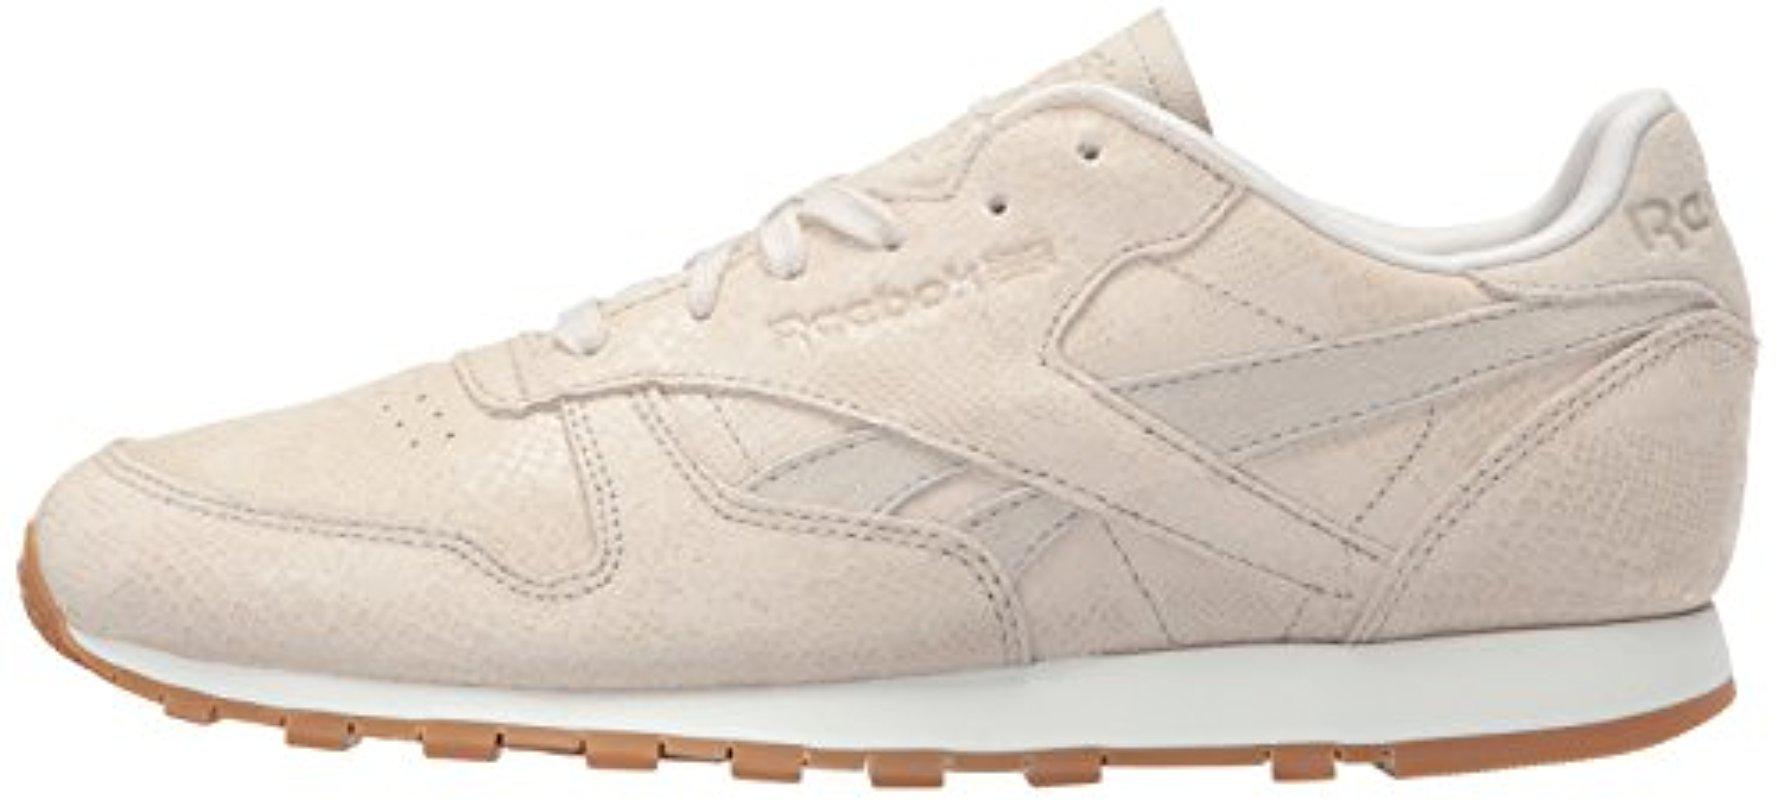 Reebok Leather Cl Lthr Clean Exotic Print Track Shoe in Cream (Natural) -  Lyst